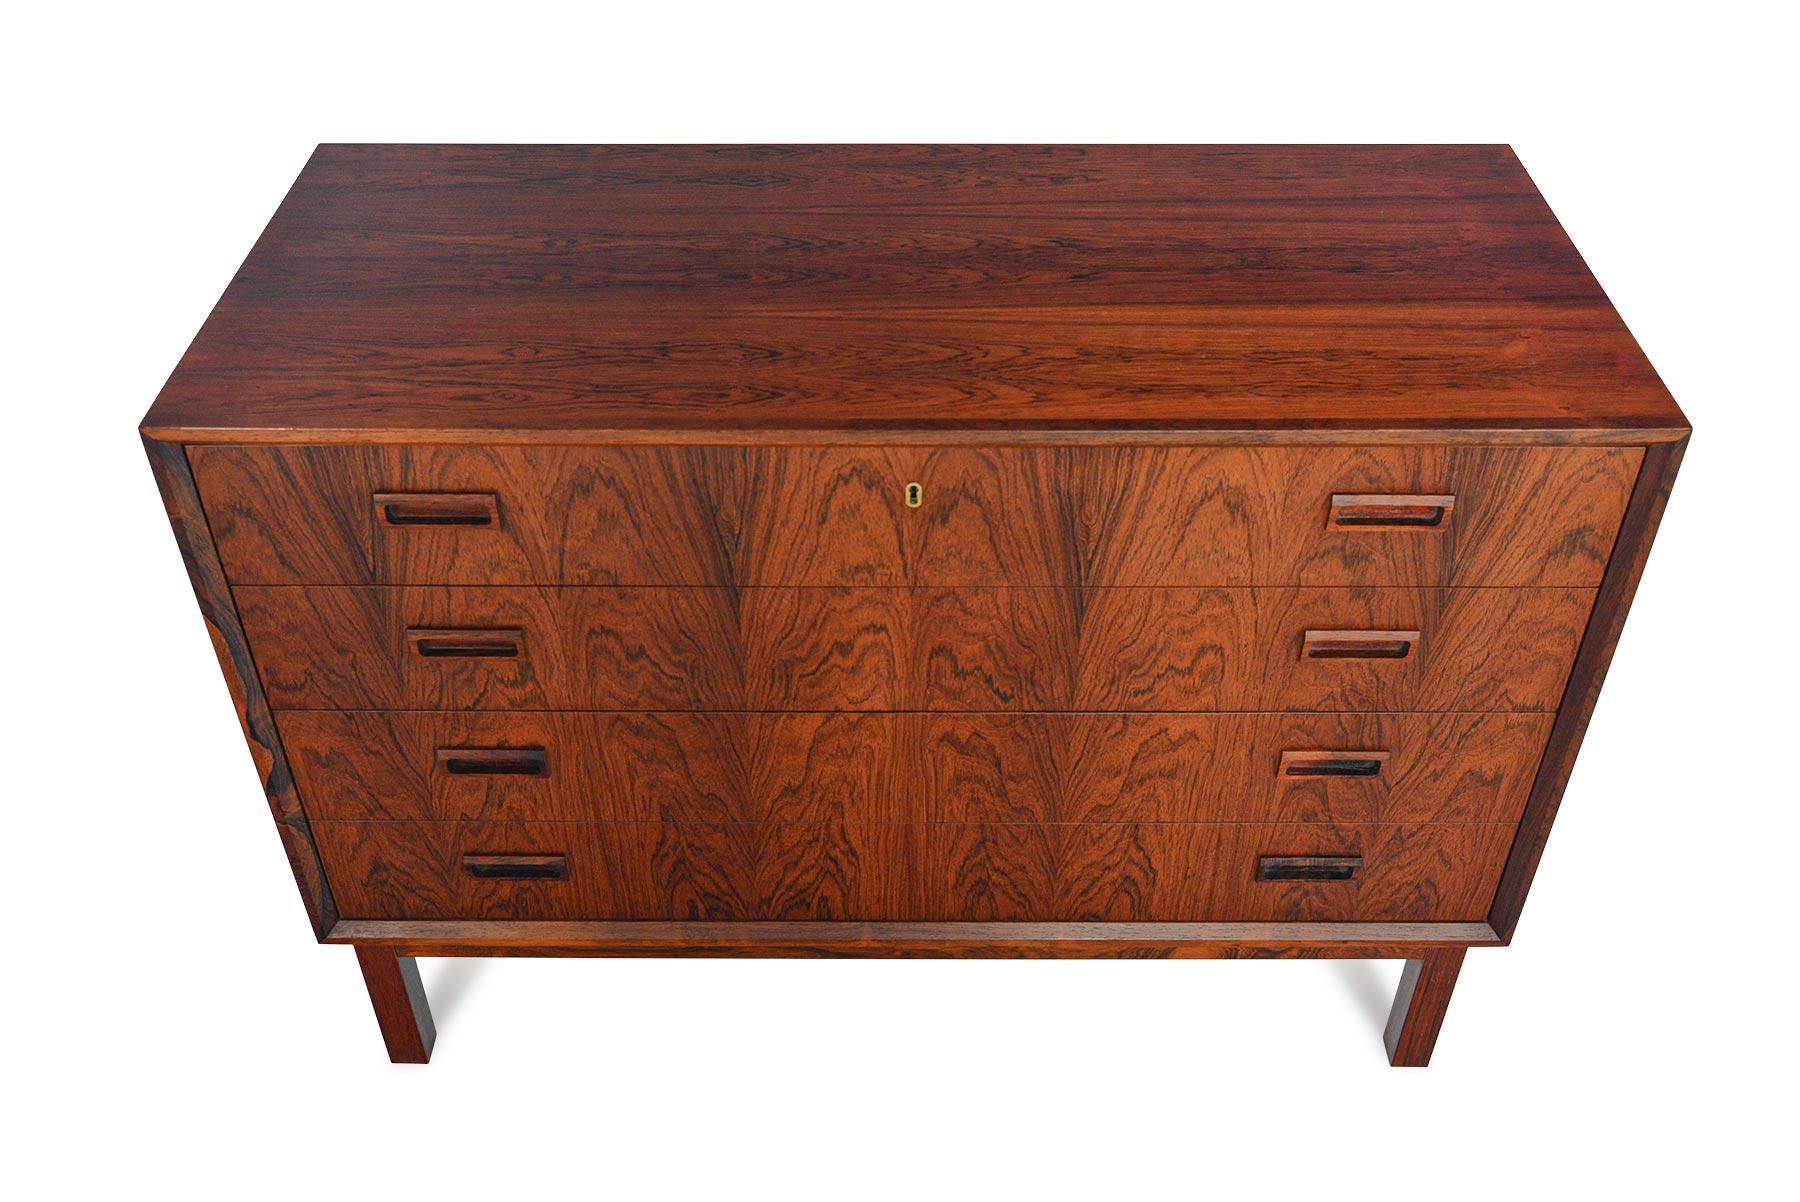 This jaw-dropping Danish modern midcentury gentleman’s chest features four extra wide drawers accented by hand carved rectangular drawer pulls. Designed by Borge Seindal, this stunning piece is finished in Brazilian rosewood. Chest features